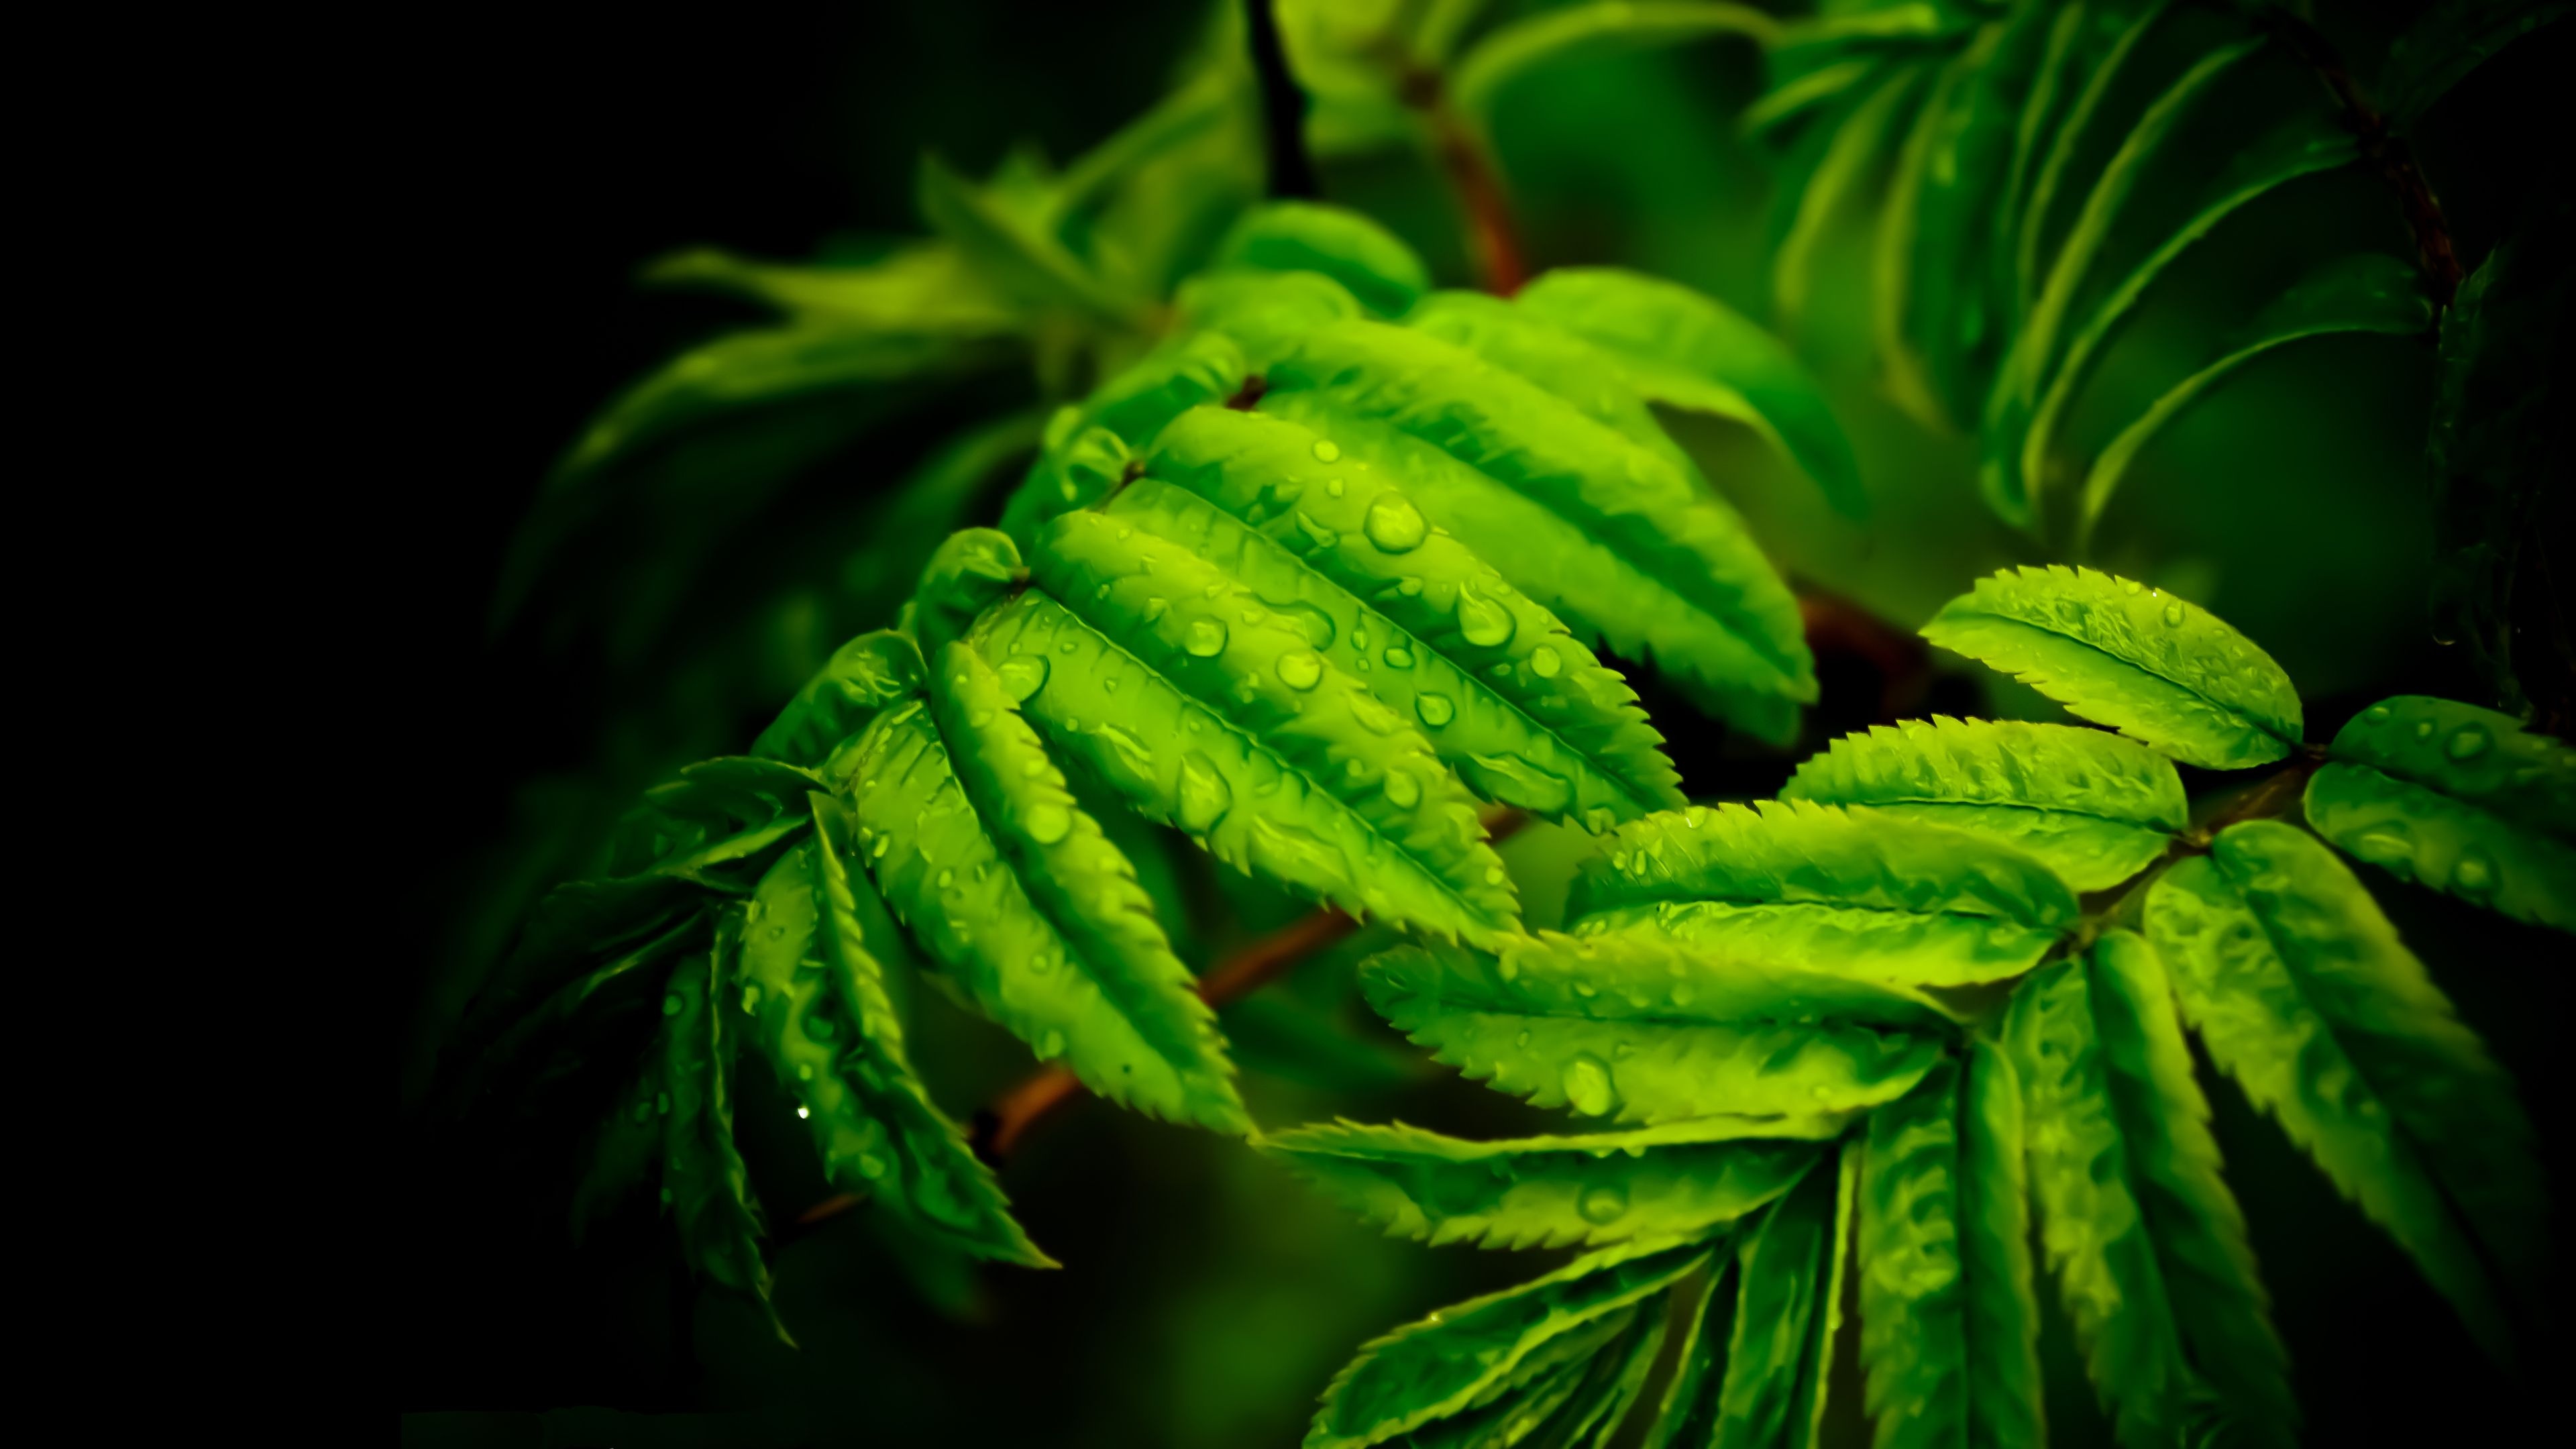 Green Leaf: Fern, A member of a group of vascular plants that reproduce via spores. 3840x2160 4K Wallpaper.